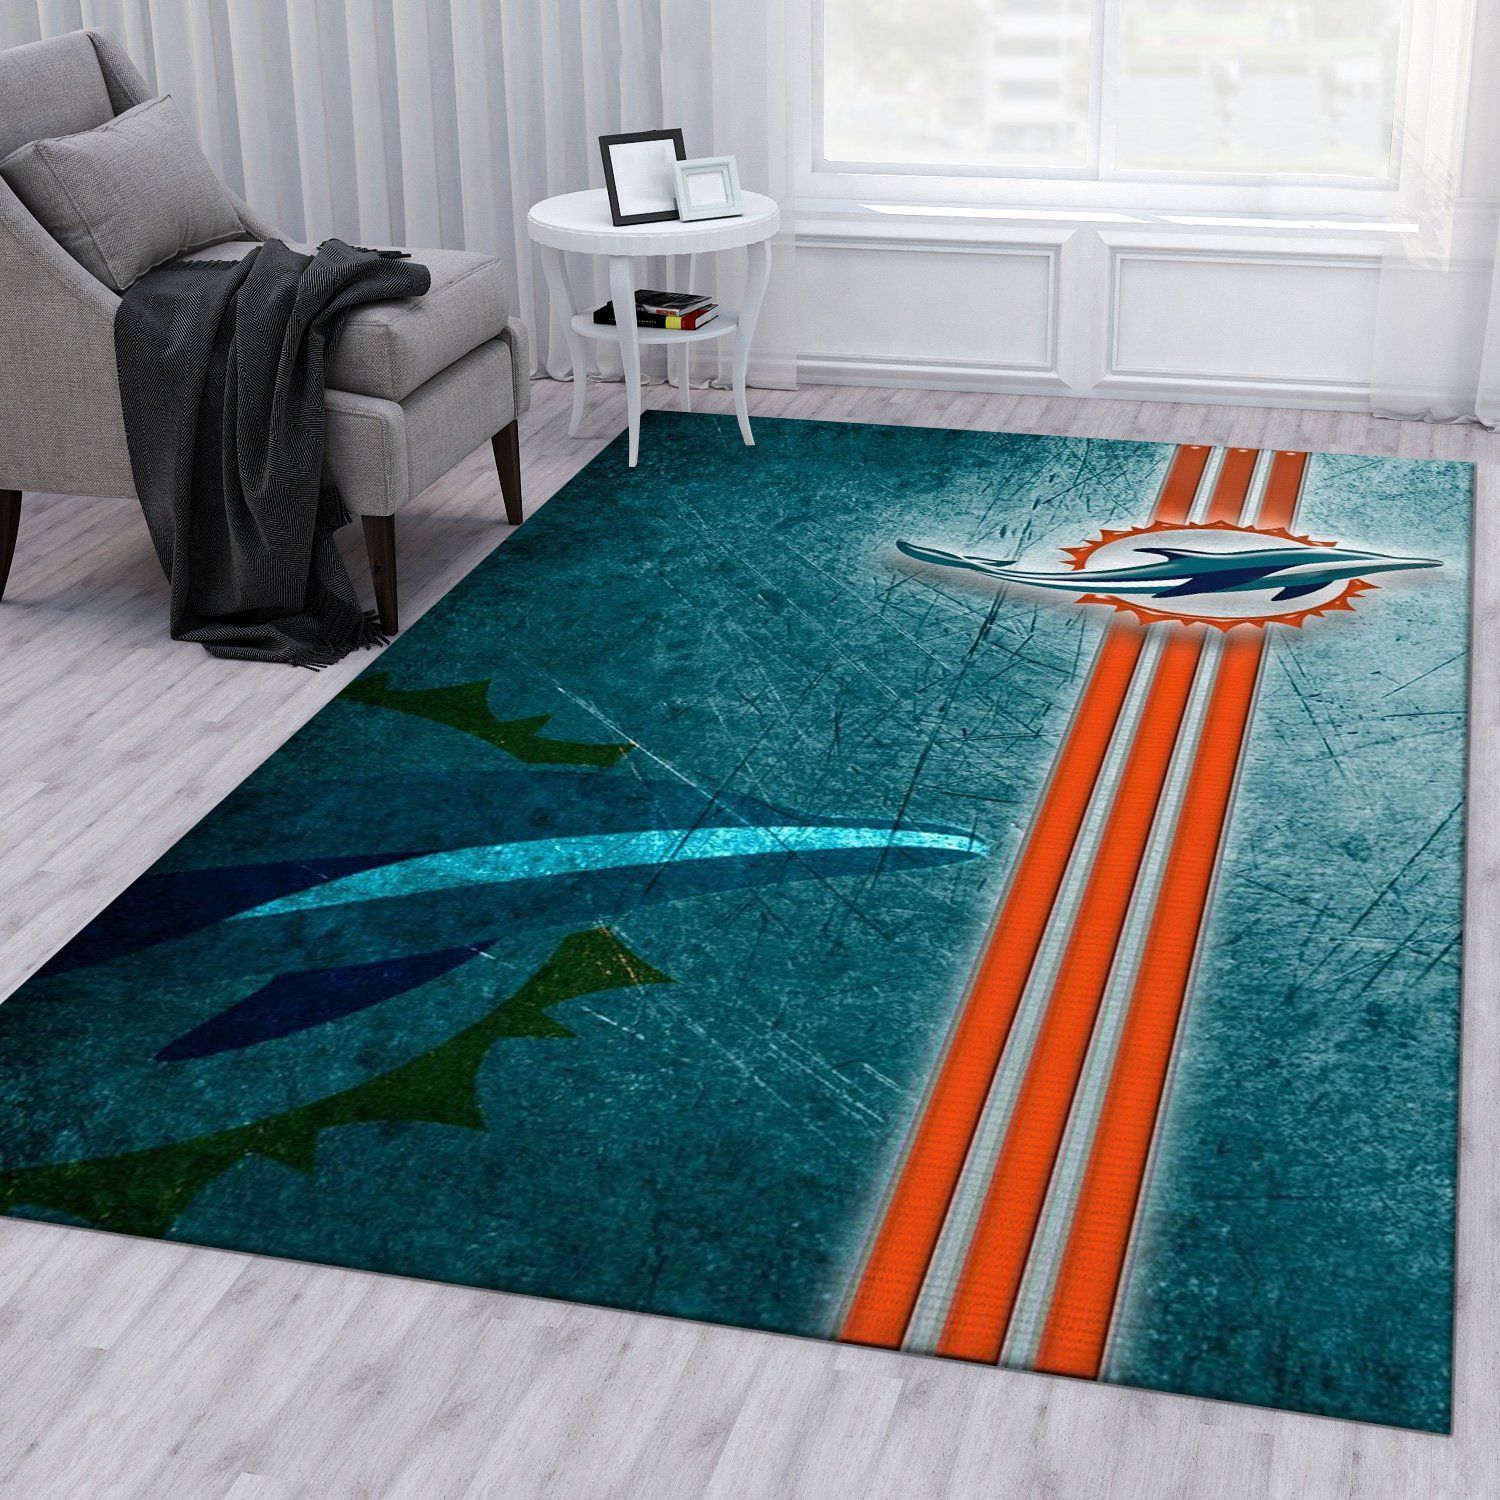 Miami Dolphins 12 NFL Area Rug For Christmas Bedroom Rug Home Decor Floor Decor - Indoor Outdoor Rugs